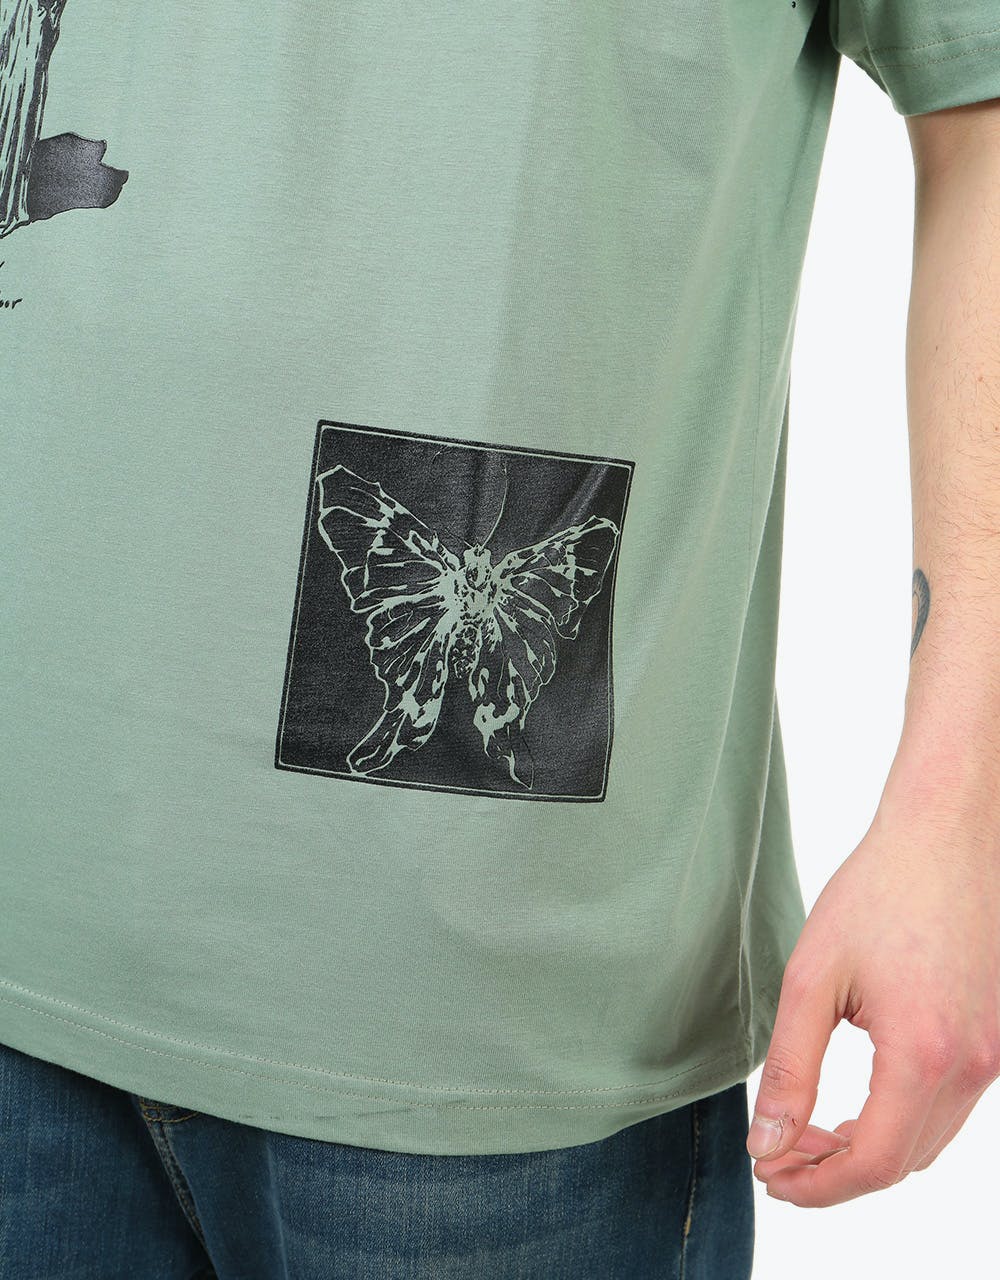 Welcome Excess Premium T-Shirt - Sage